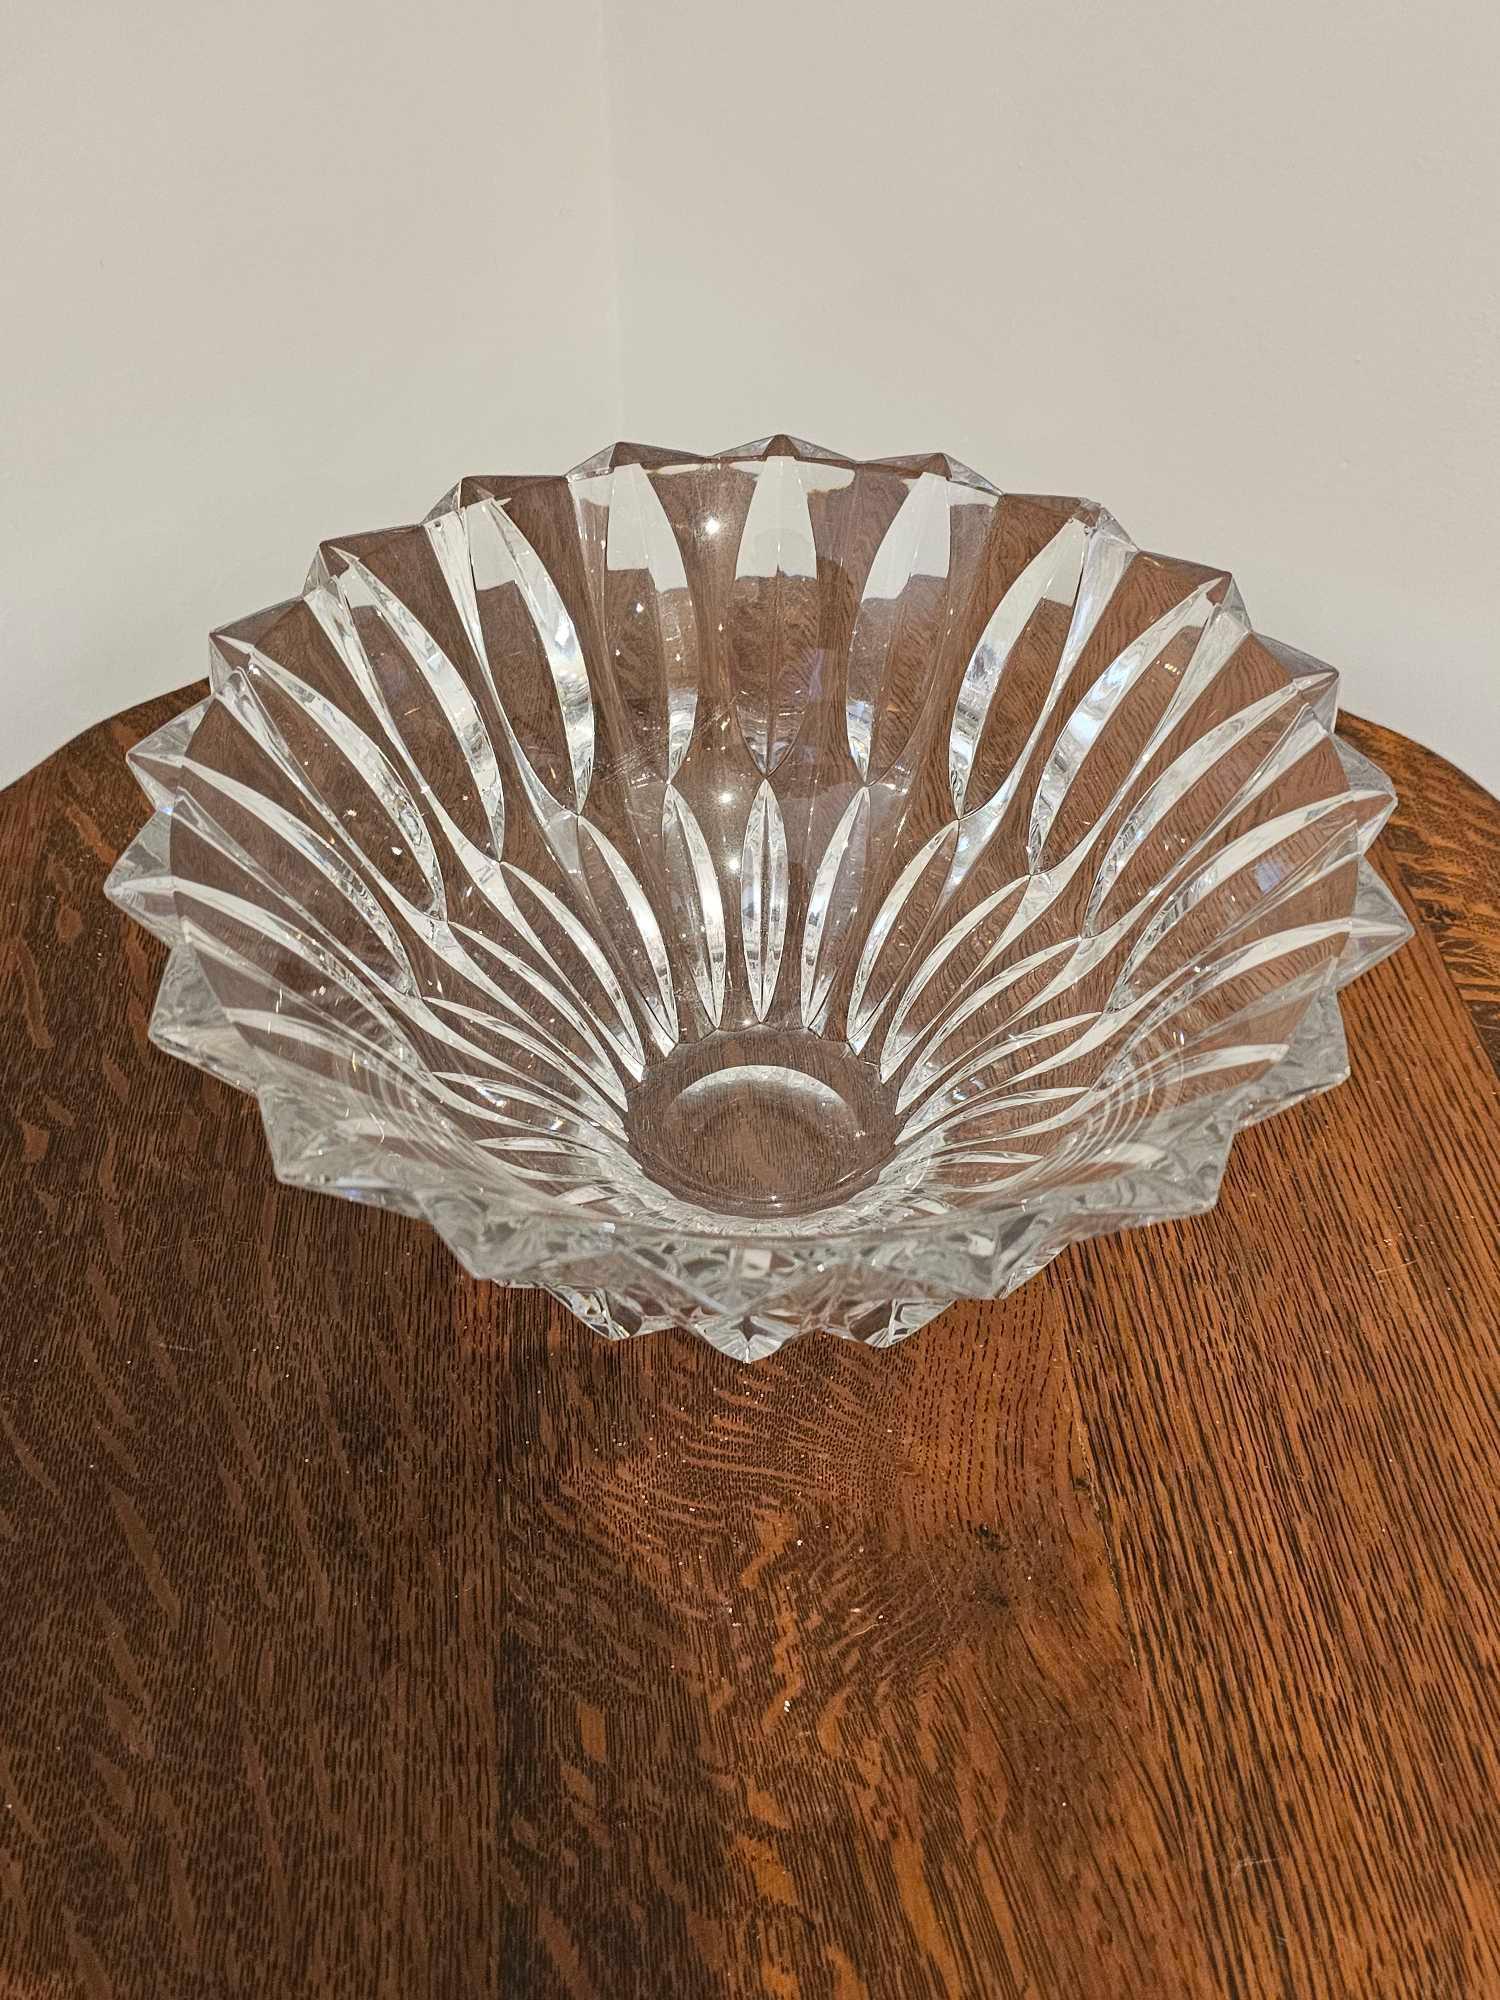 Faceted Cut Crystal Large Bowl 29 X 18cm - Image 4 of 7